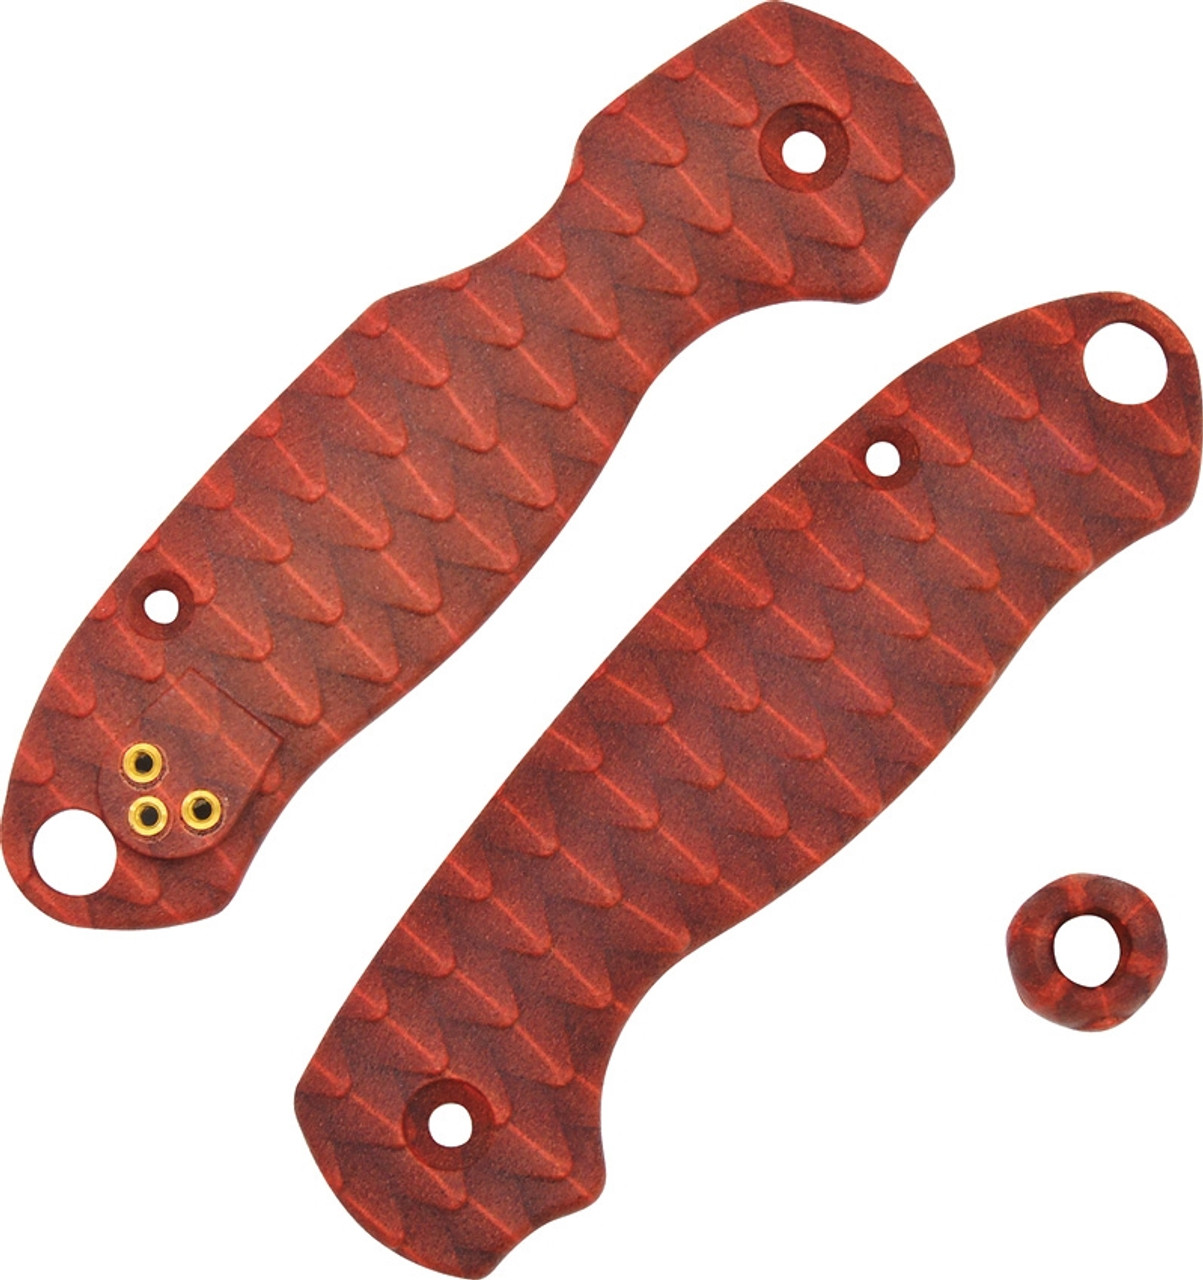 Chroma Scales Red (CHR10031318) Textured Nylon PA12 Construction - Made for Spyderco Para Military 3 - Matching Bead Included